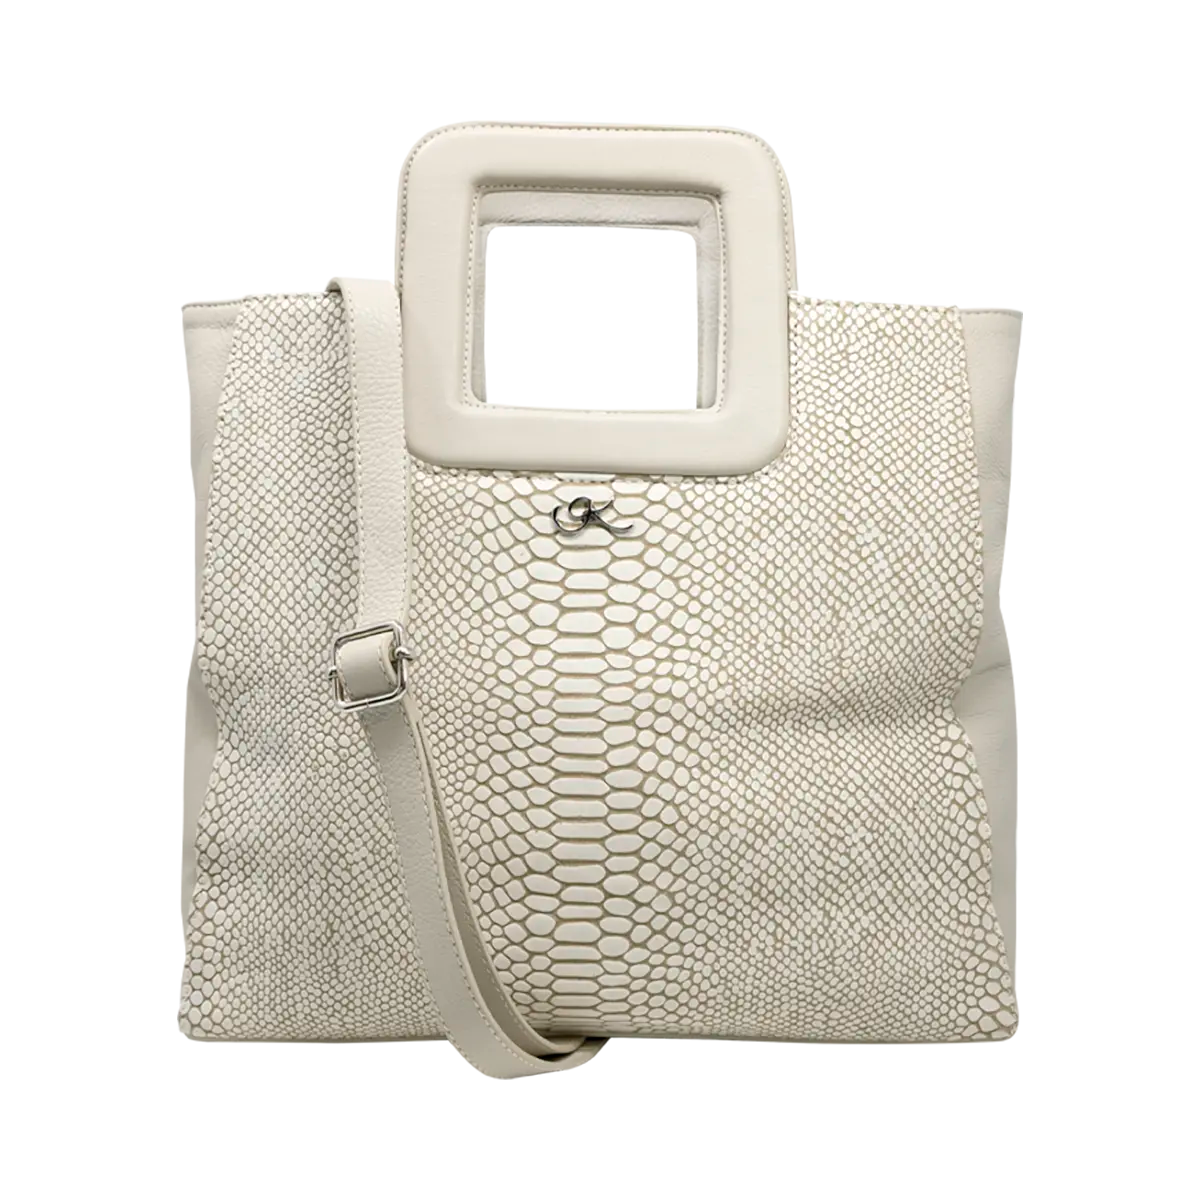 large ivory print ltd leather print handbag with a square handle. Accessory for women in San Diego, CA.